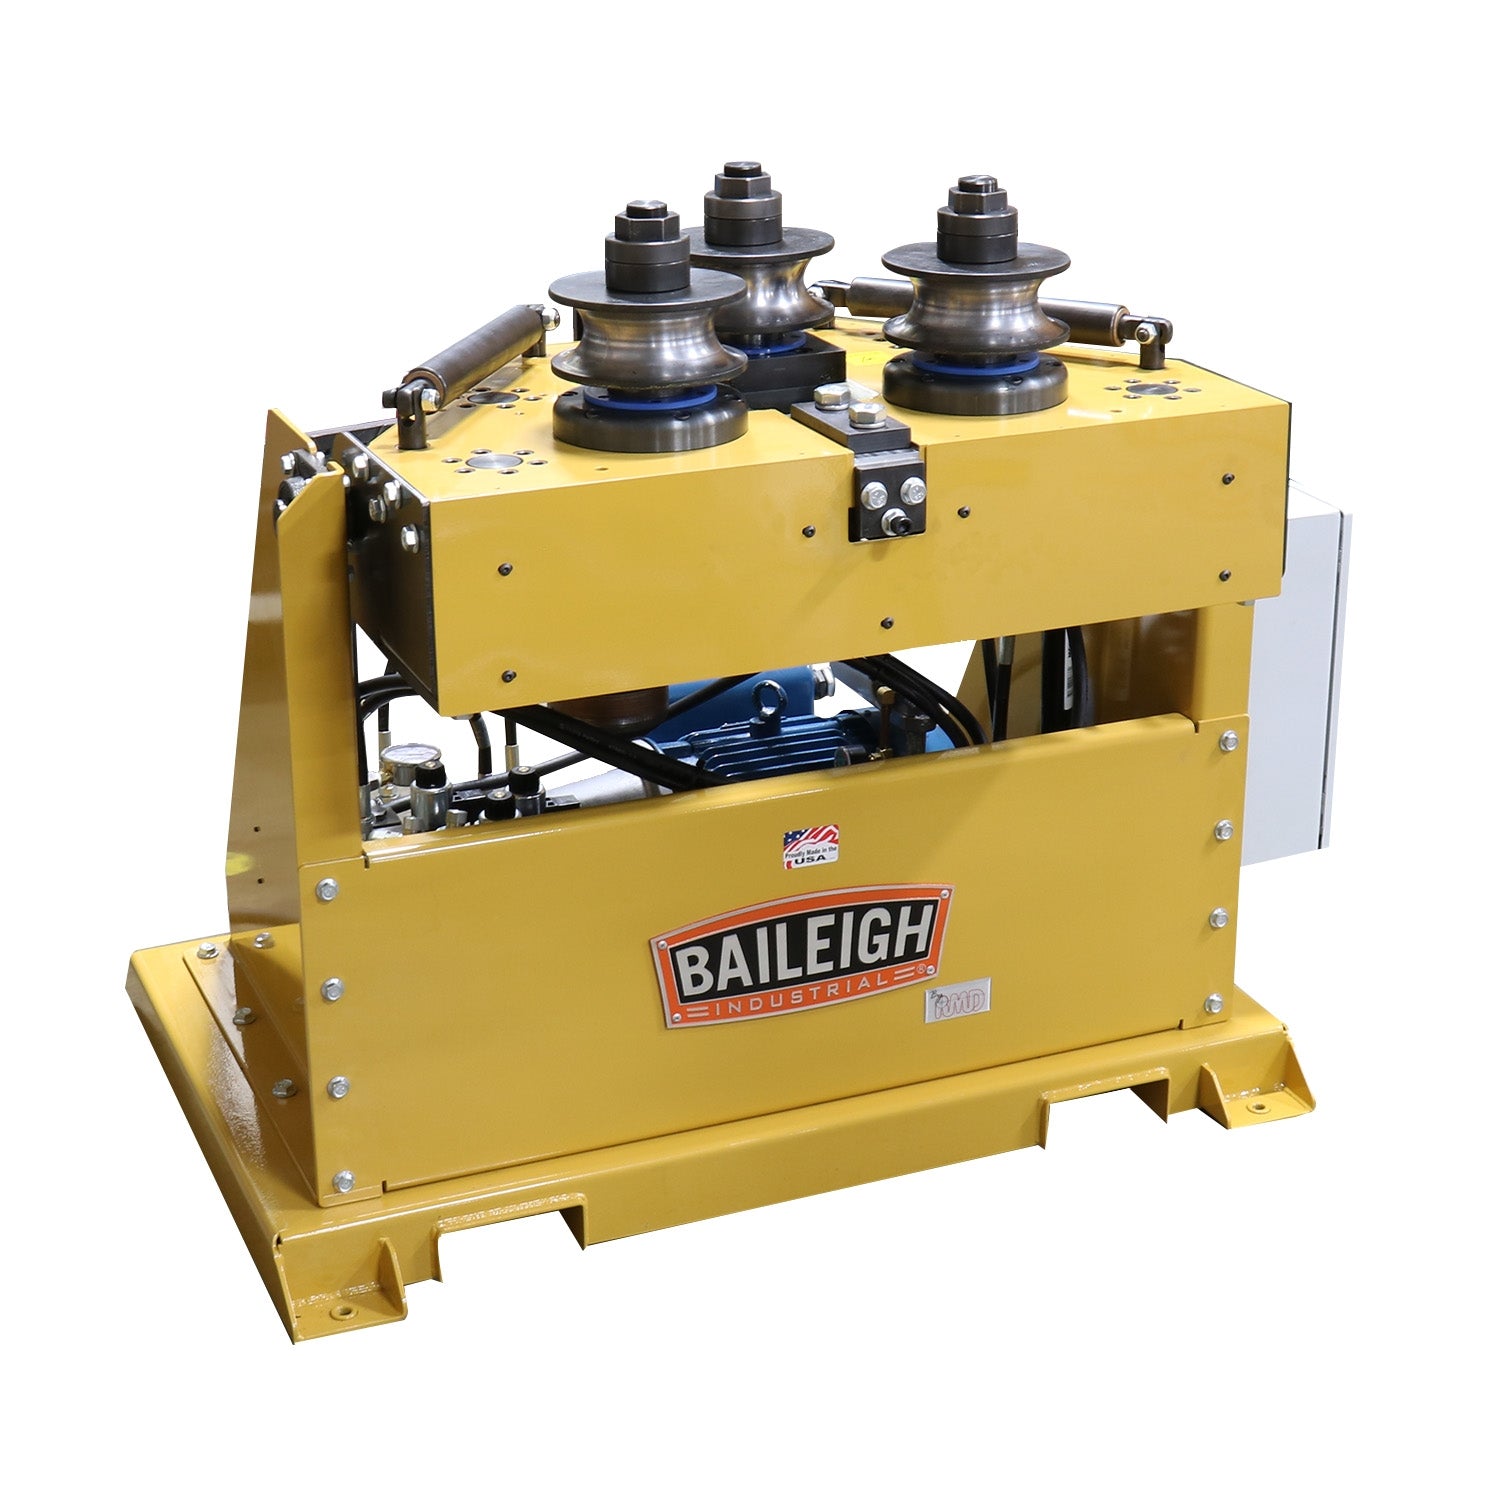 Baileigh R-M60-HD 220V 1 Phase Roll Bender with Hydraulic Drive, Manual Top Roll and Tilt 2" Shedule 40 Capacity